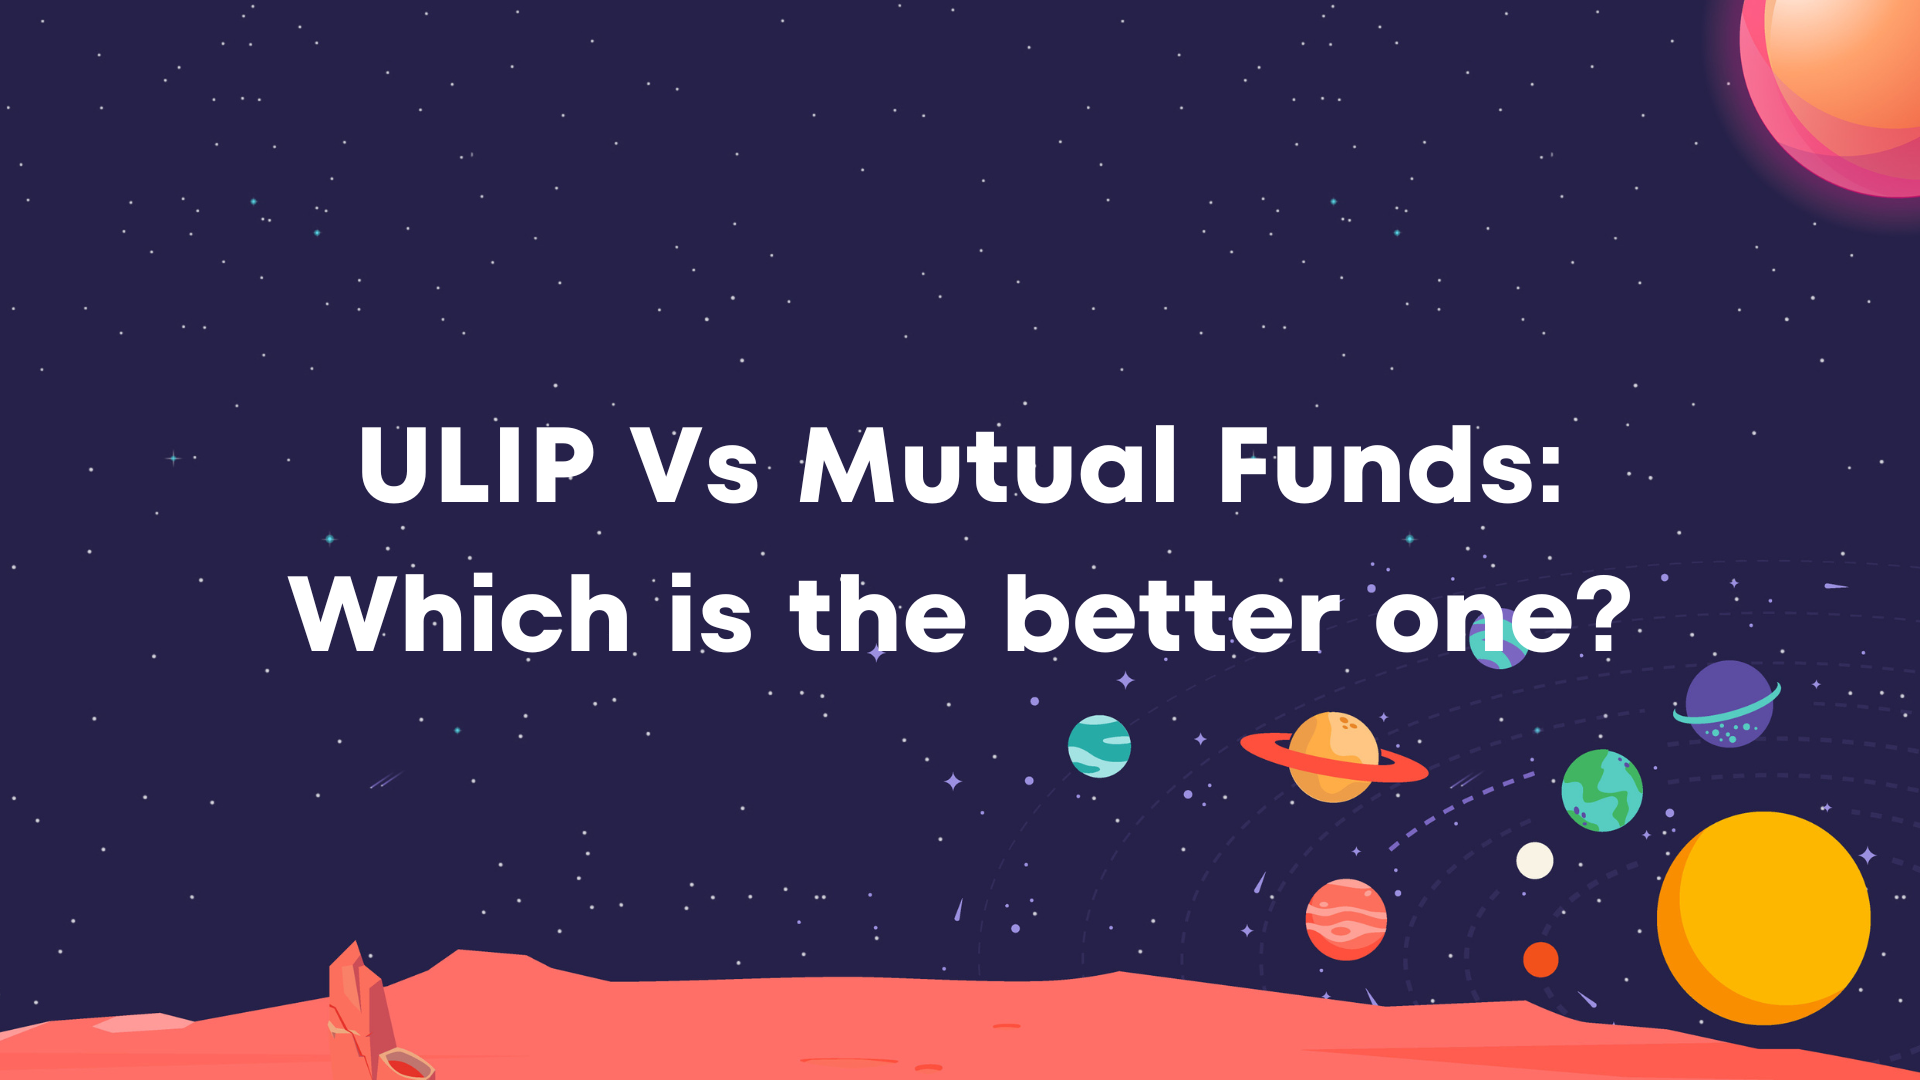 Cover image for ULIP vs Mutual Fund article